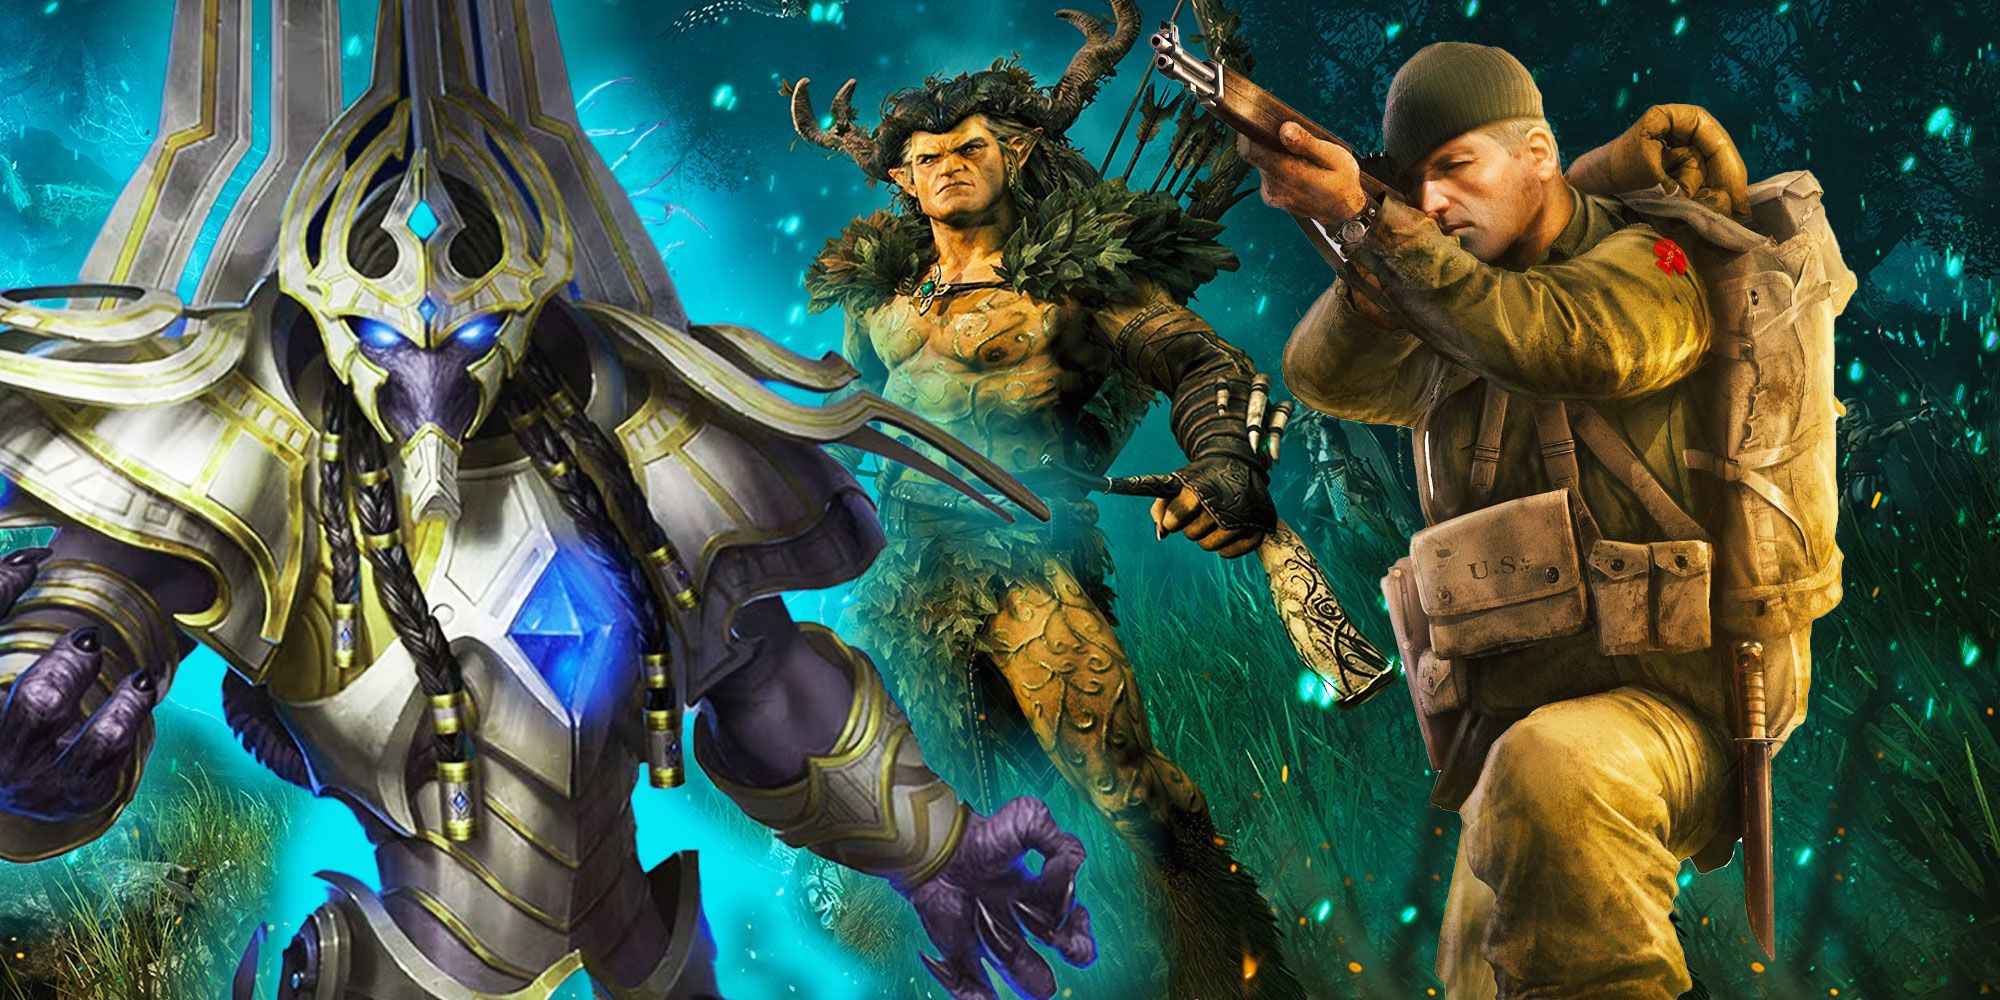 Protoss soldier from StarCraft with a Wood Elf and soldier next to him.